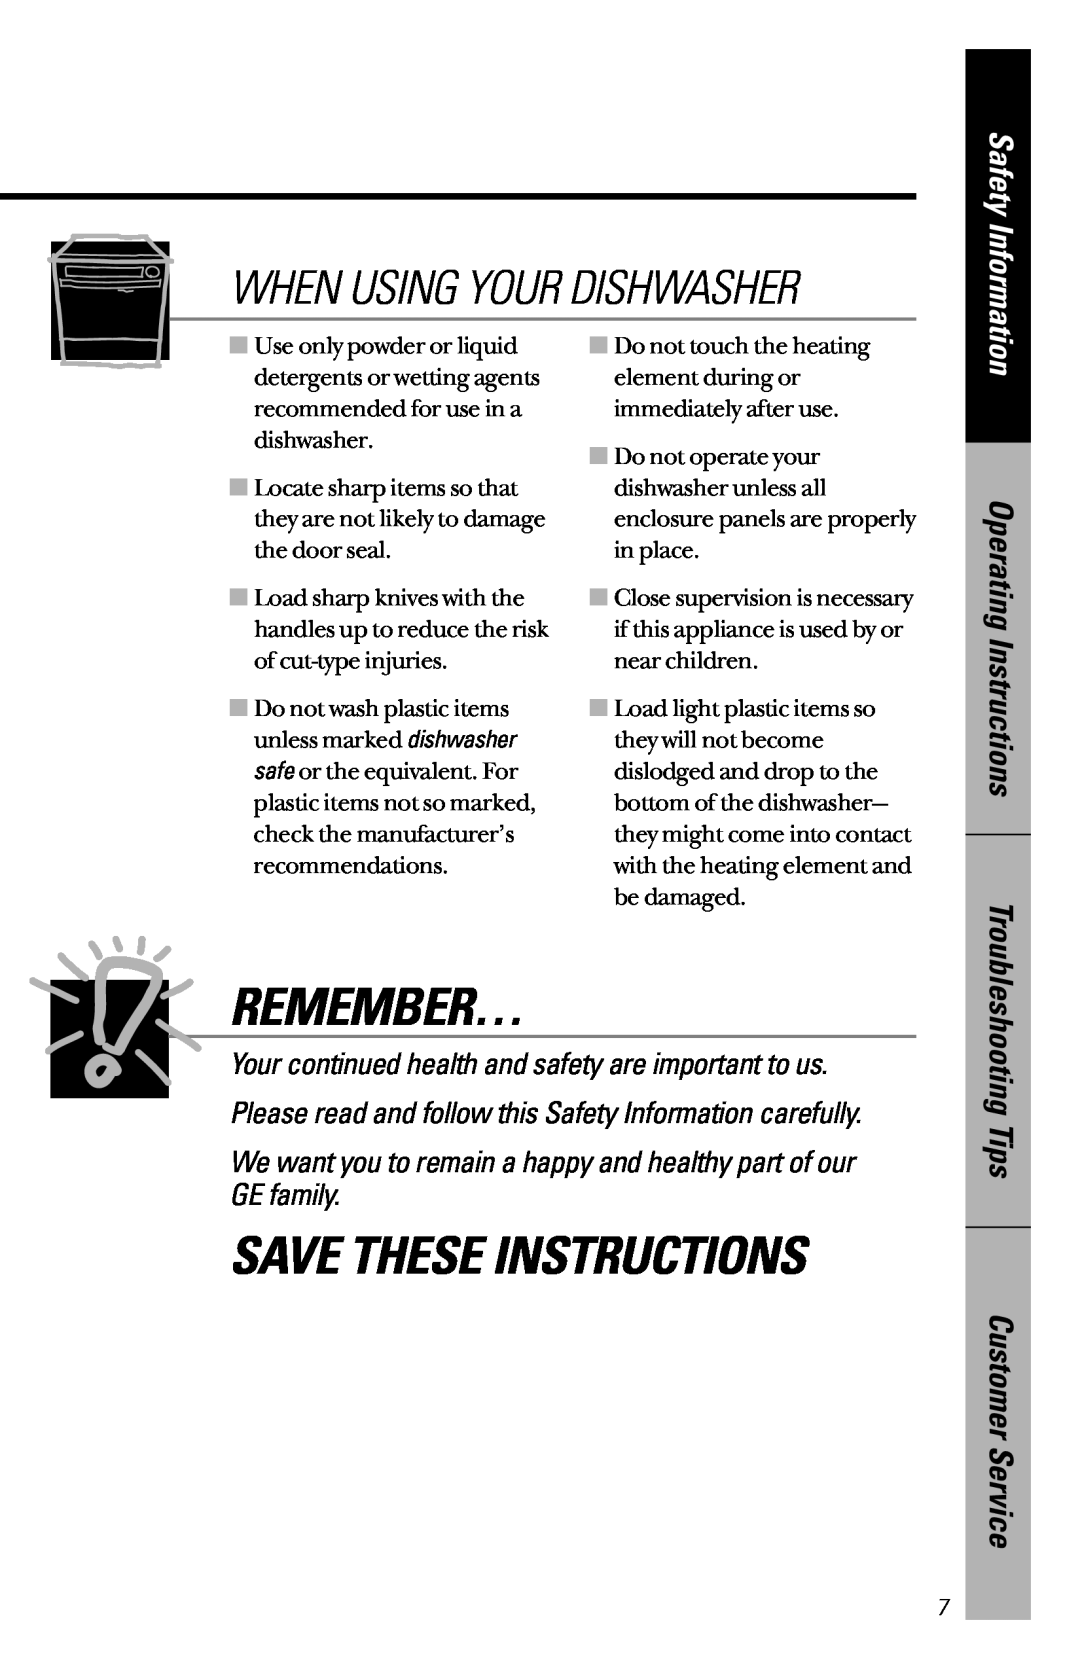 GE 49-5780, GSD725 When Using Your Dishwasher, Operating Instructions, Customer Service, Troubleshooting Tips, Remember… 